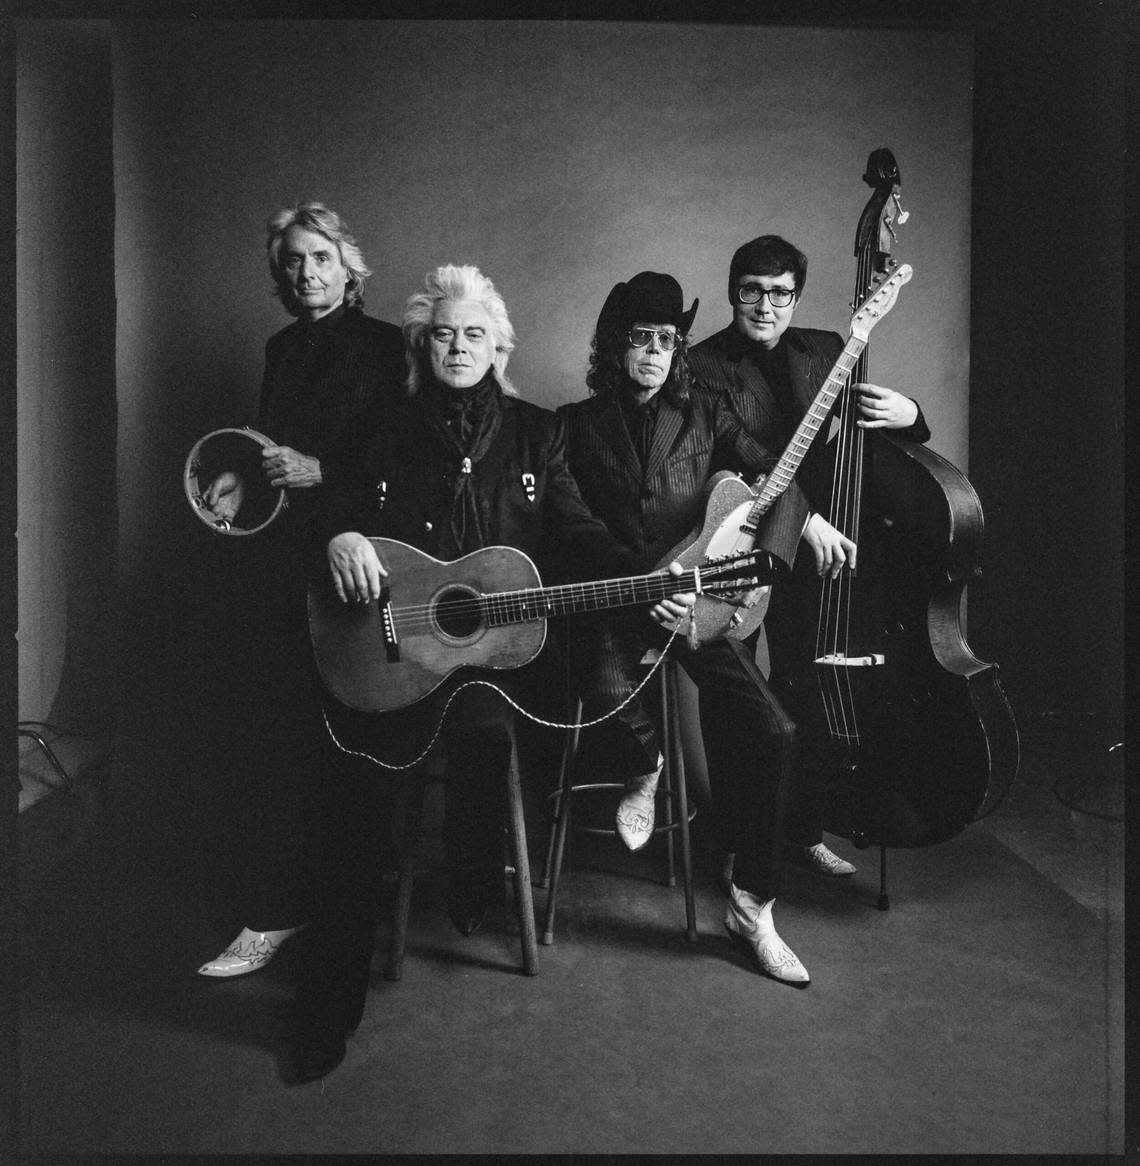 Marty Stuart and his band, The Fabulous Superlatives, will be at The Lyric in Lexington.